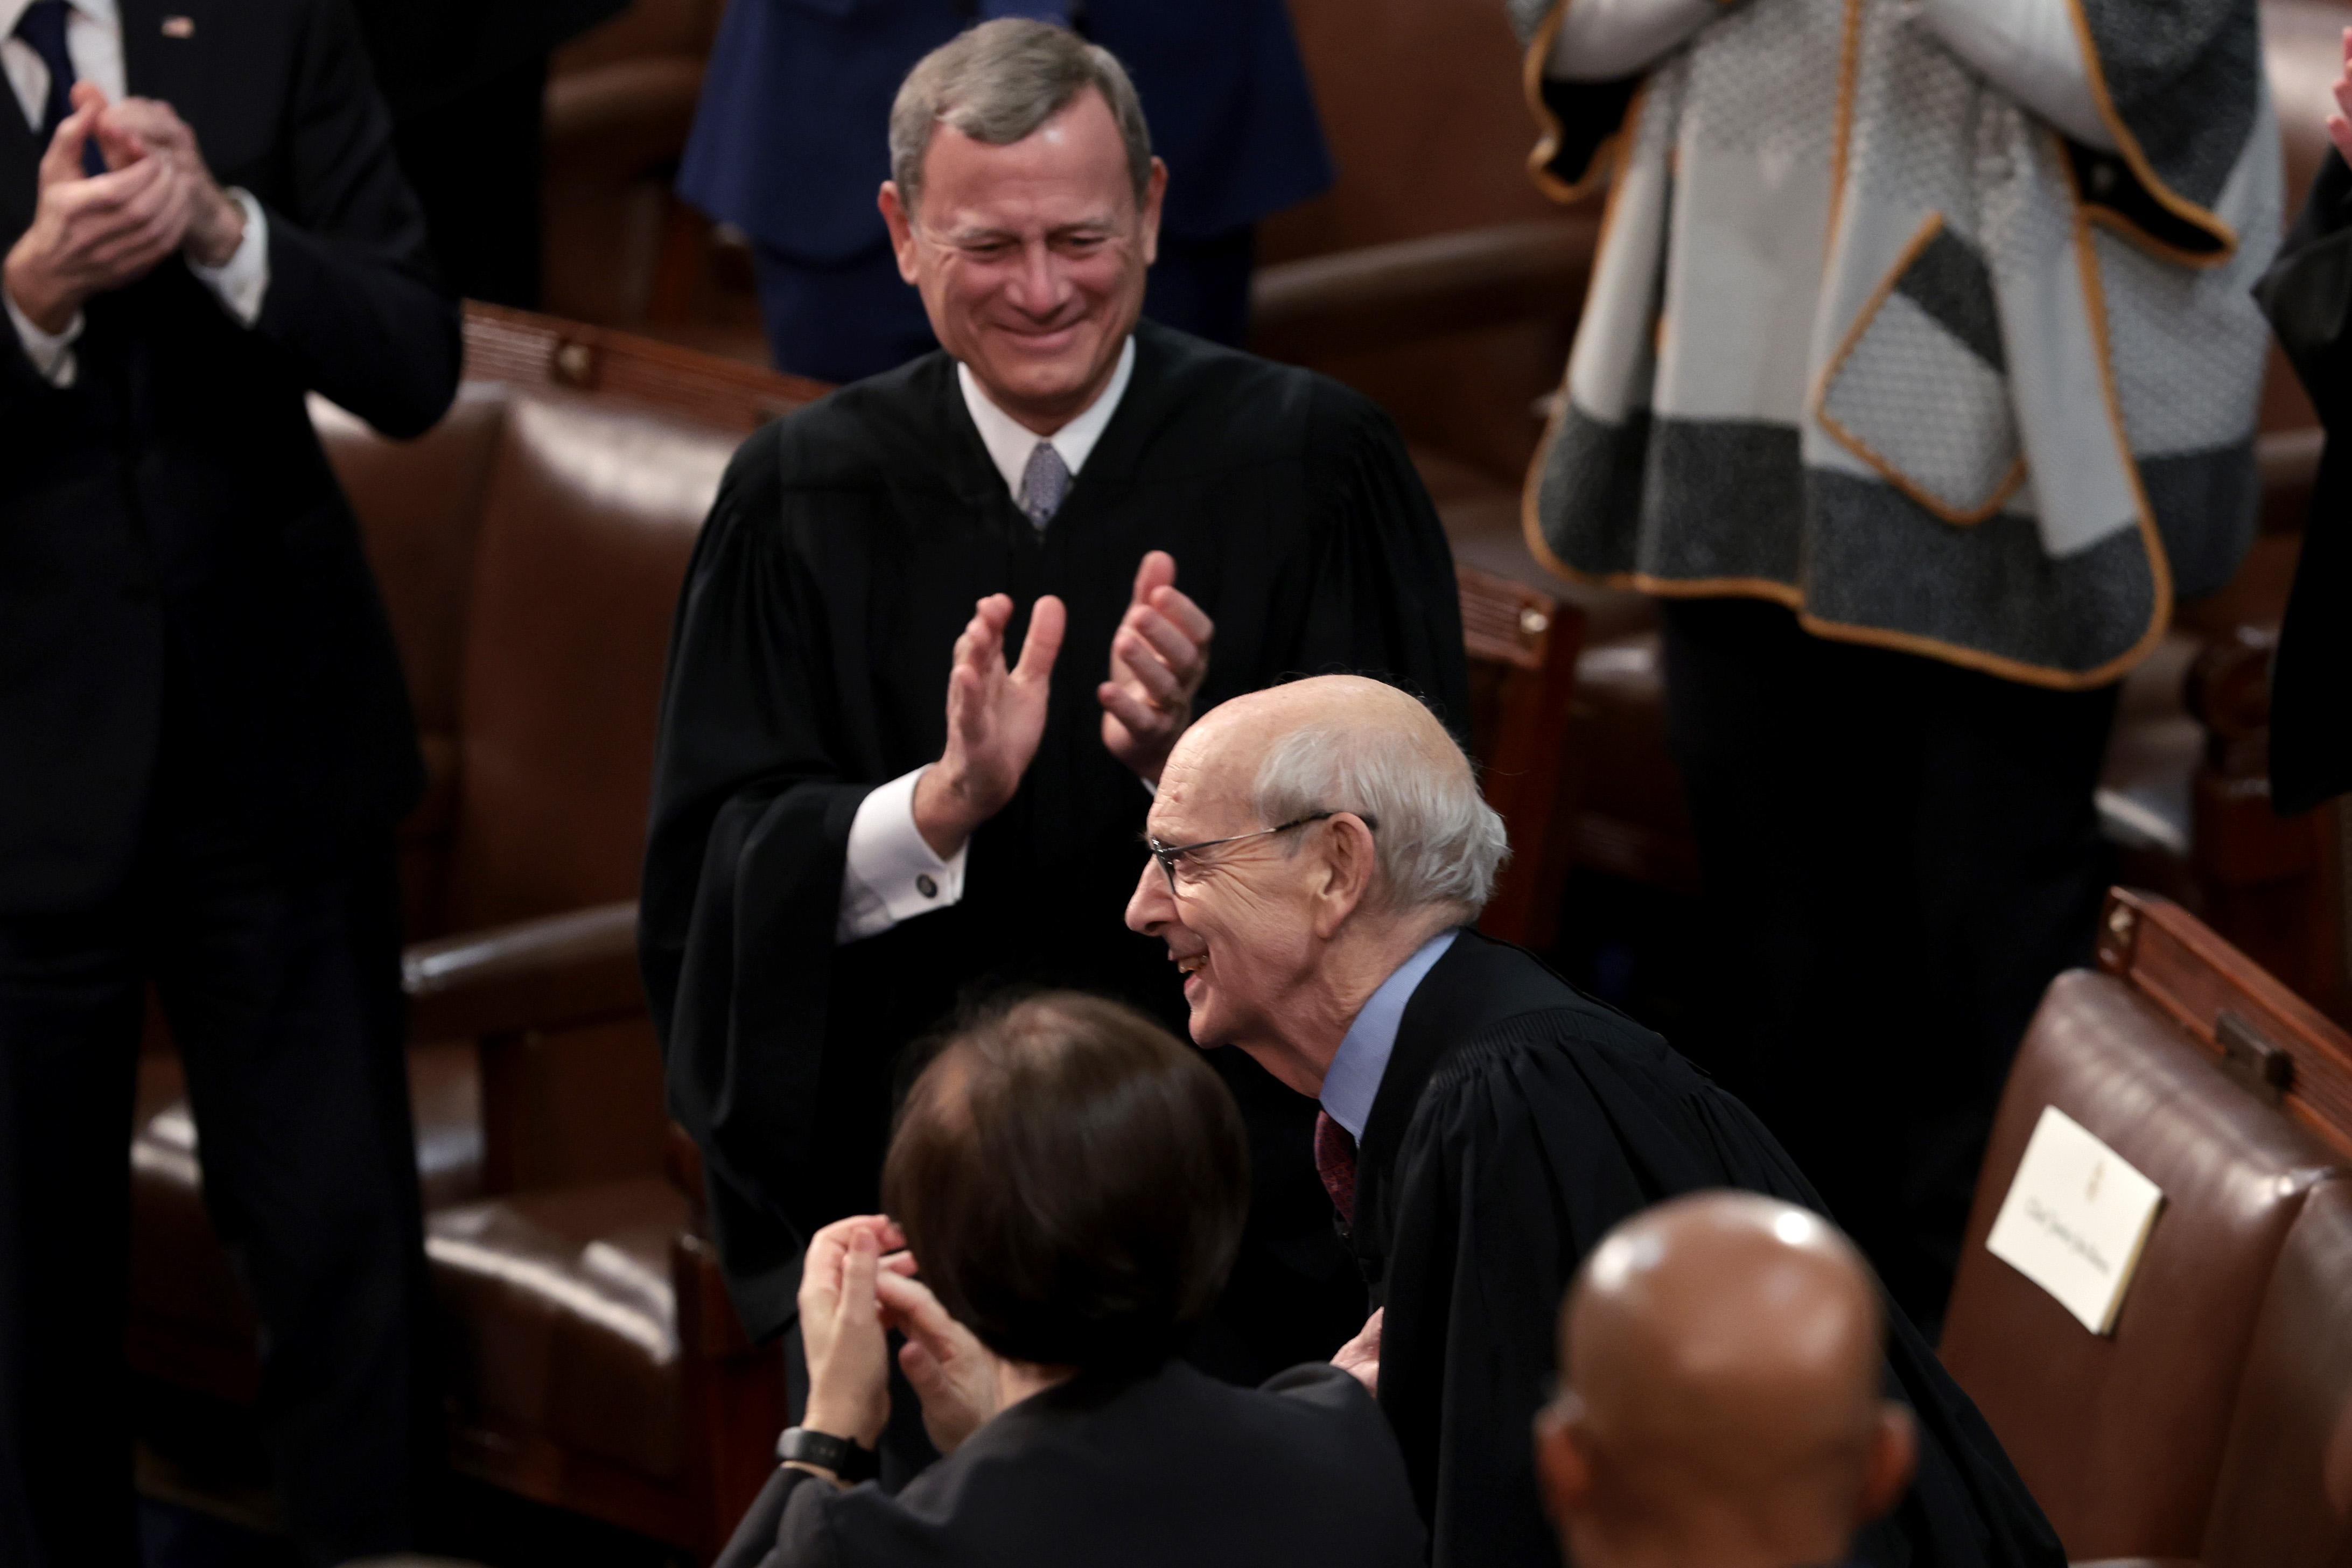 U.S. Supreme Court Associate Justice Stephen Breyer (C) receives applause after being recognized by President Joe Biden during the State of the Union address during a joint session of Congress in the U.S. Capitol's House Chamber March 01, 2022 in Washington, DC. 